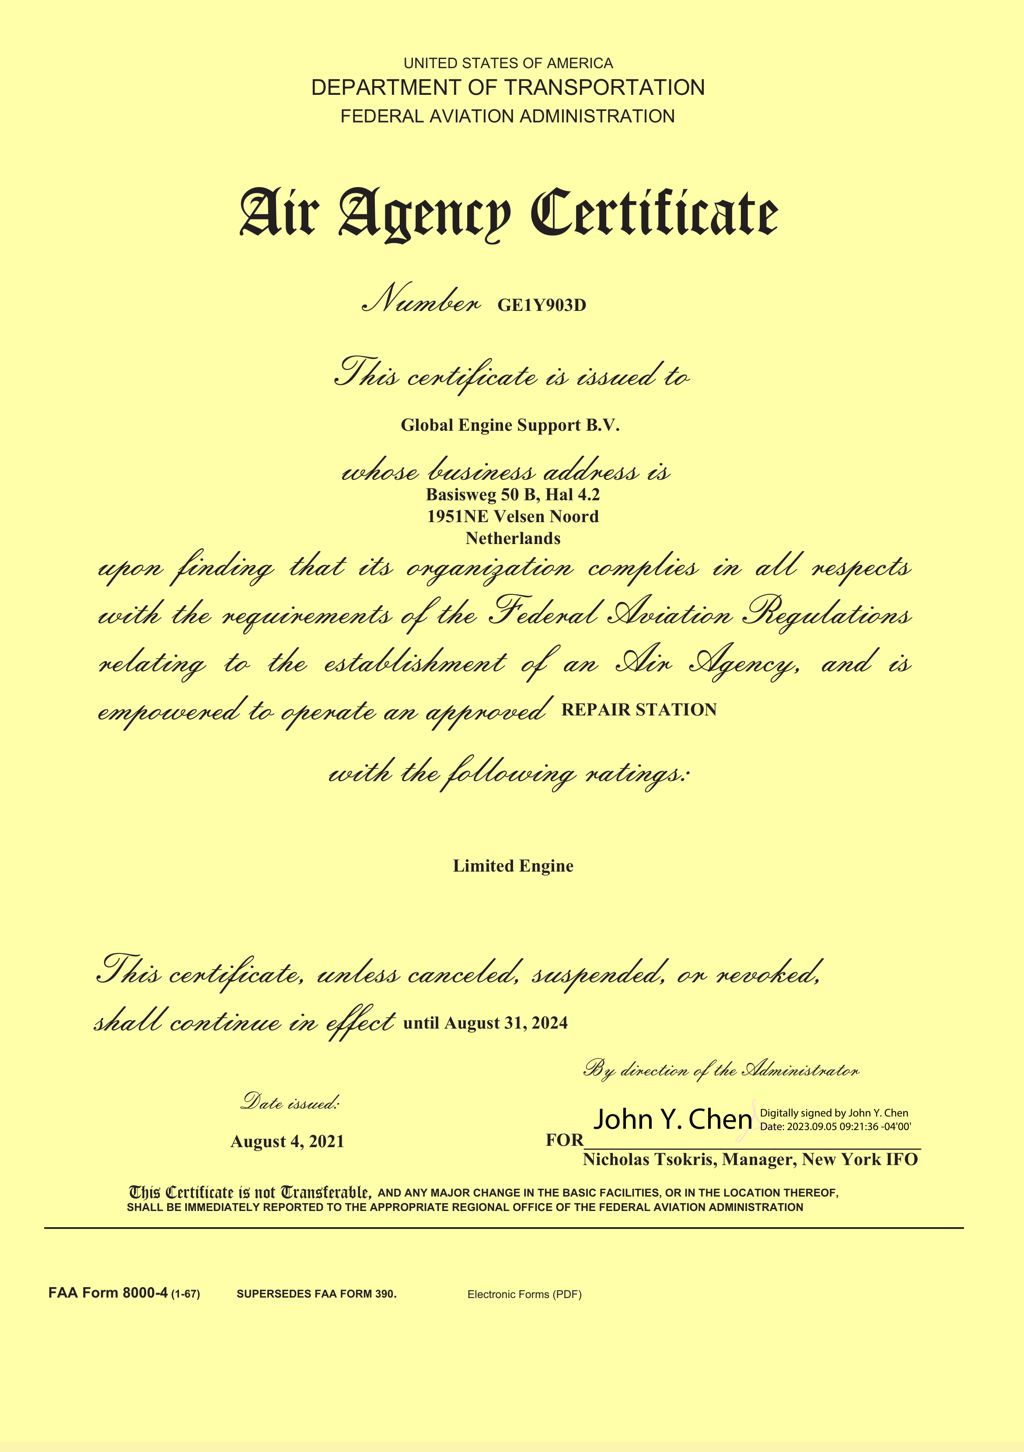 FAA - Air Agency Certificate | Global Engine Support